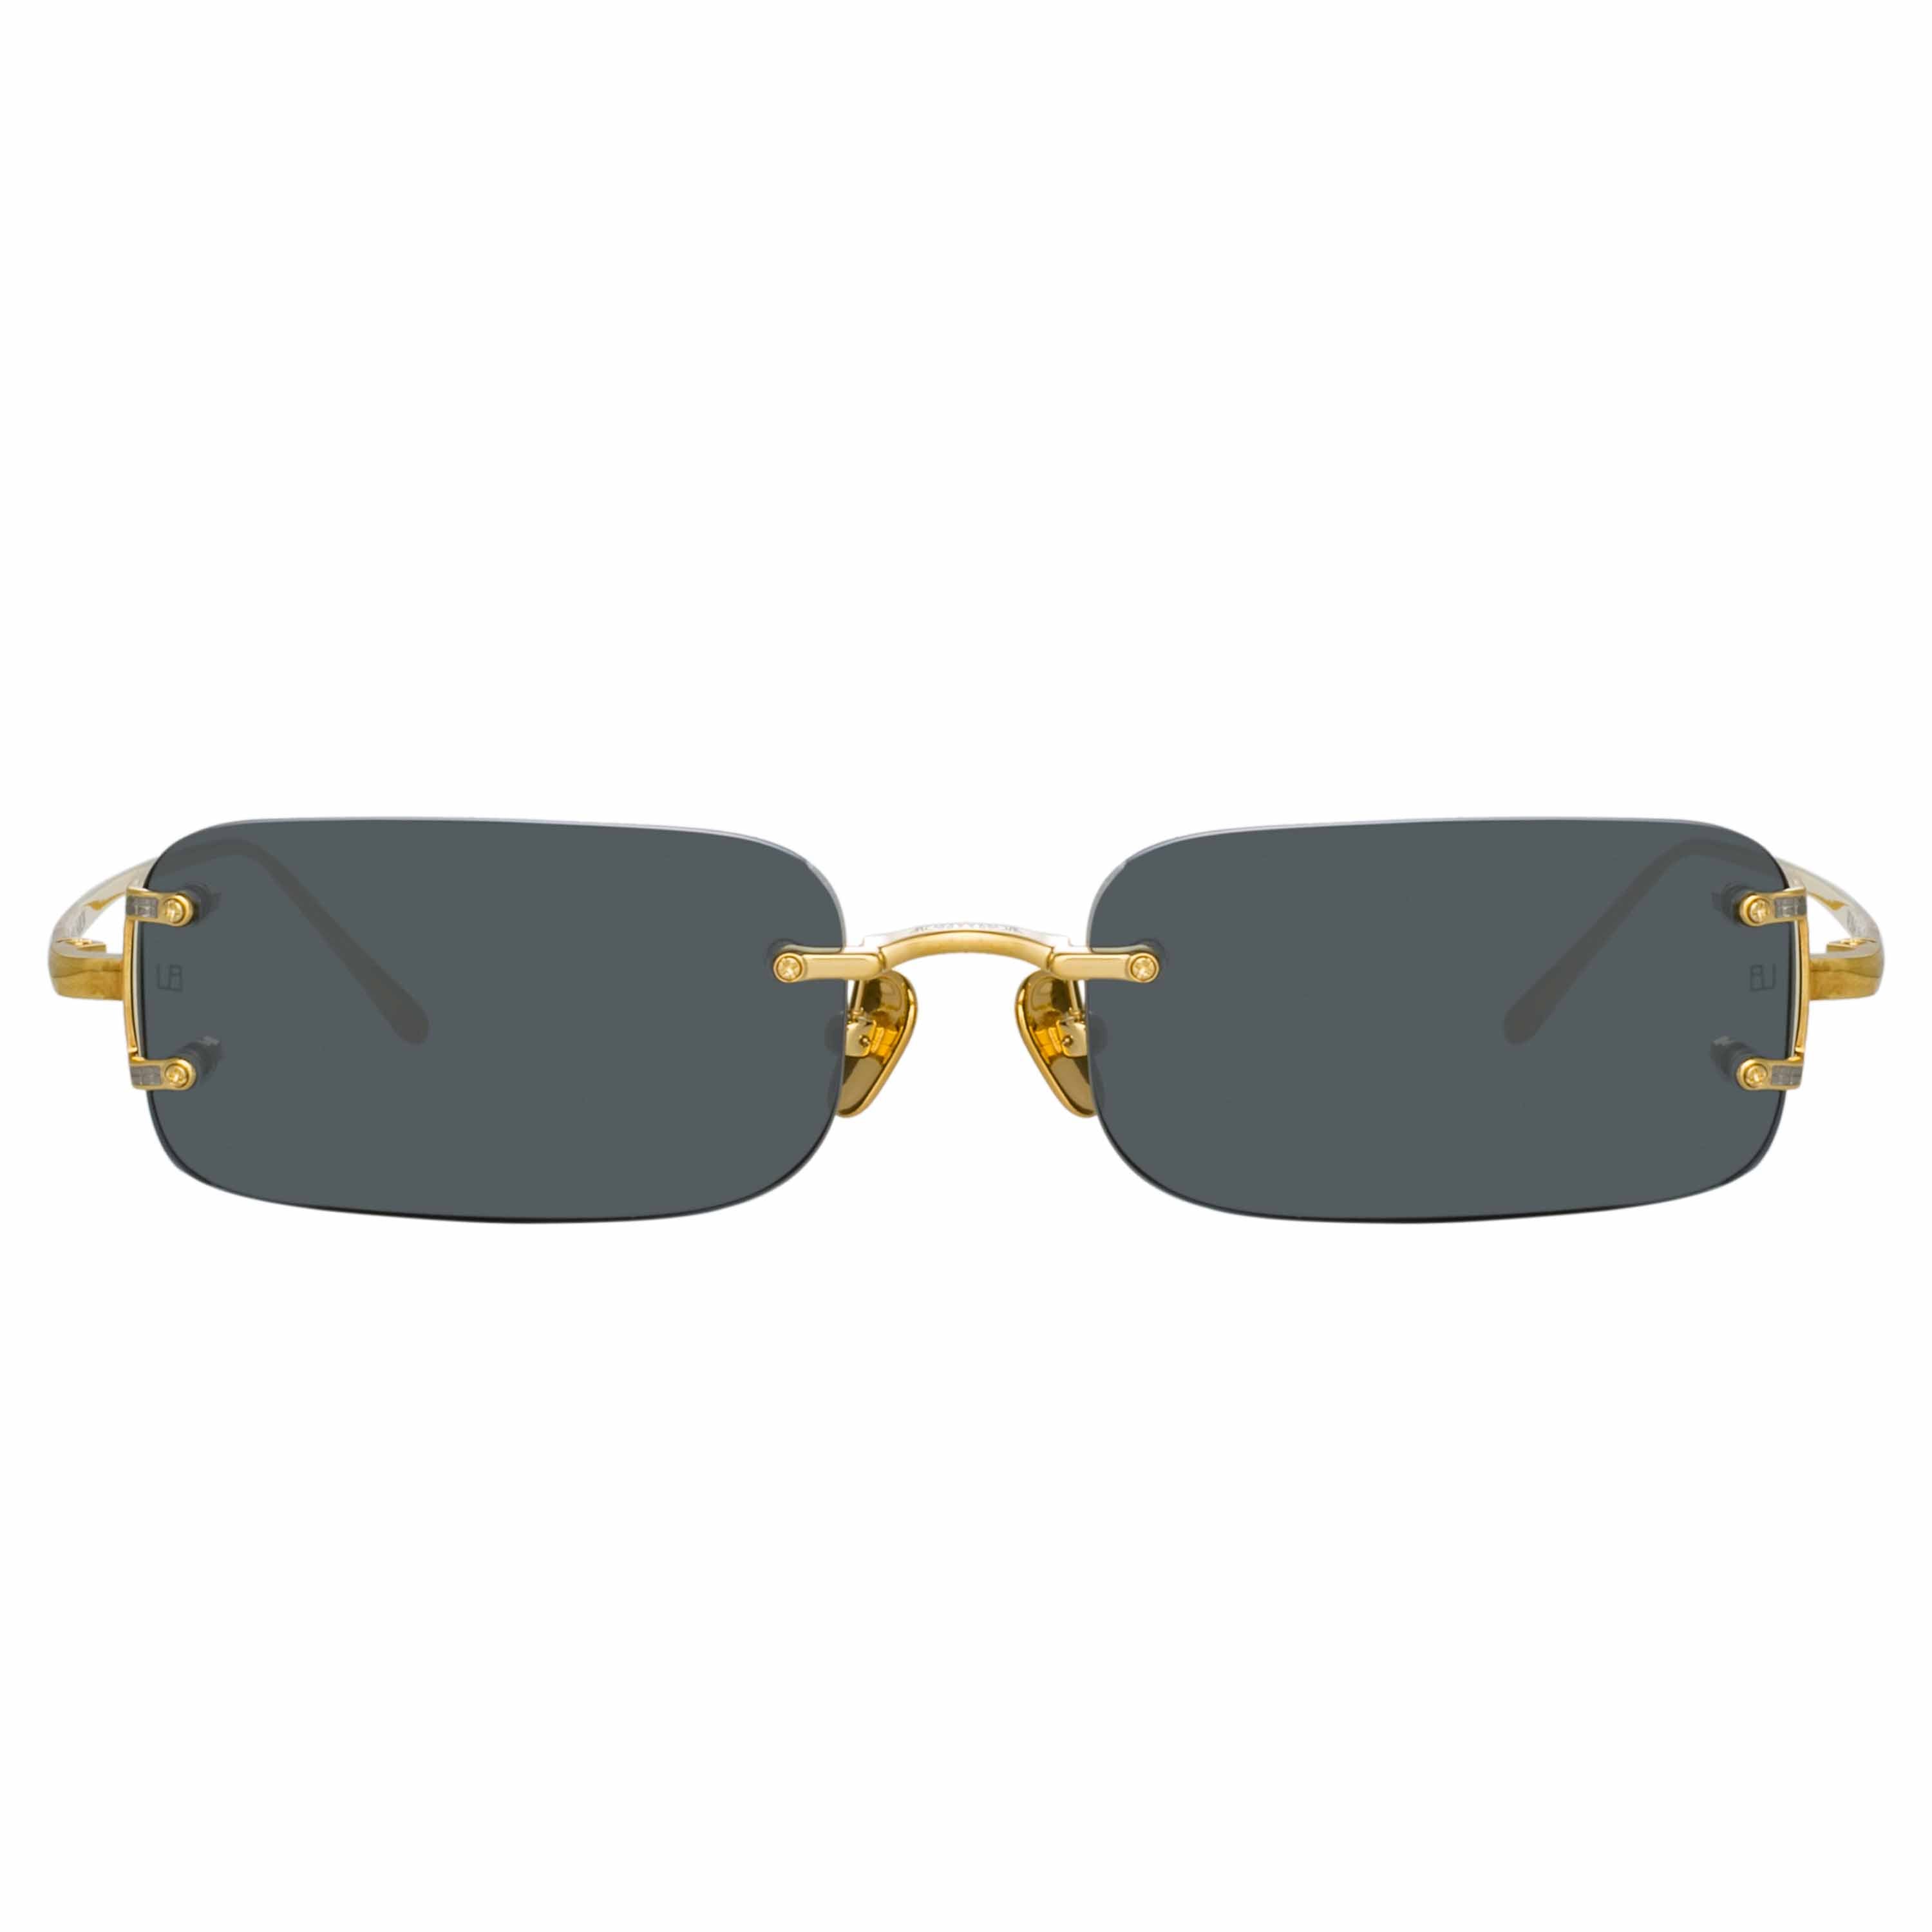 Taylor Rectangular Sunglasses in Yellow Gold and Grey